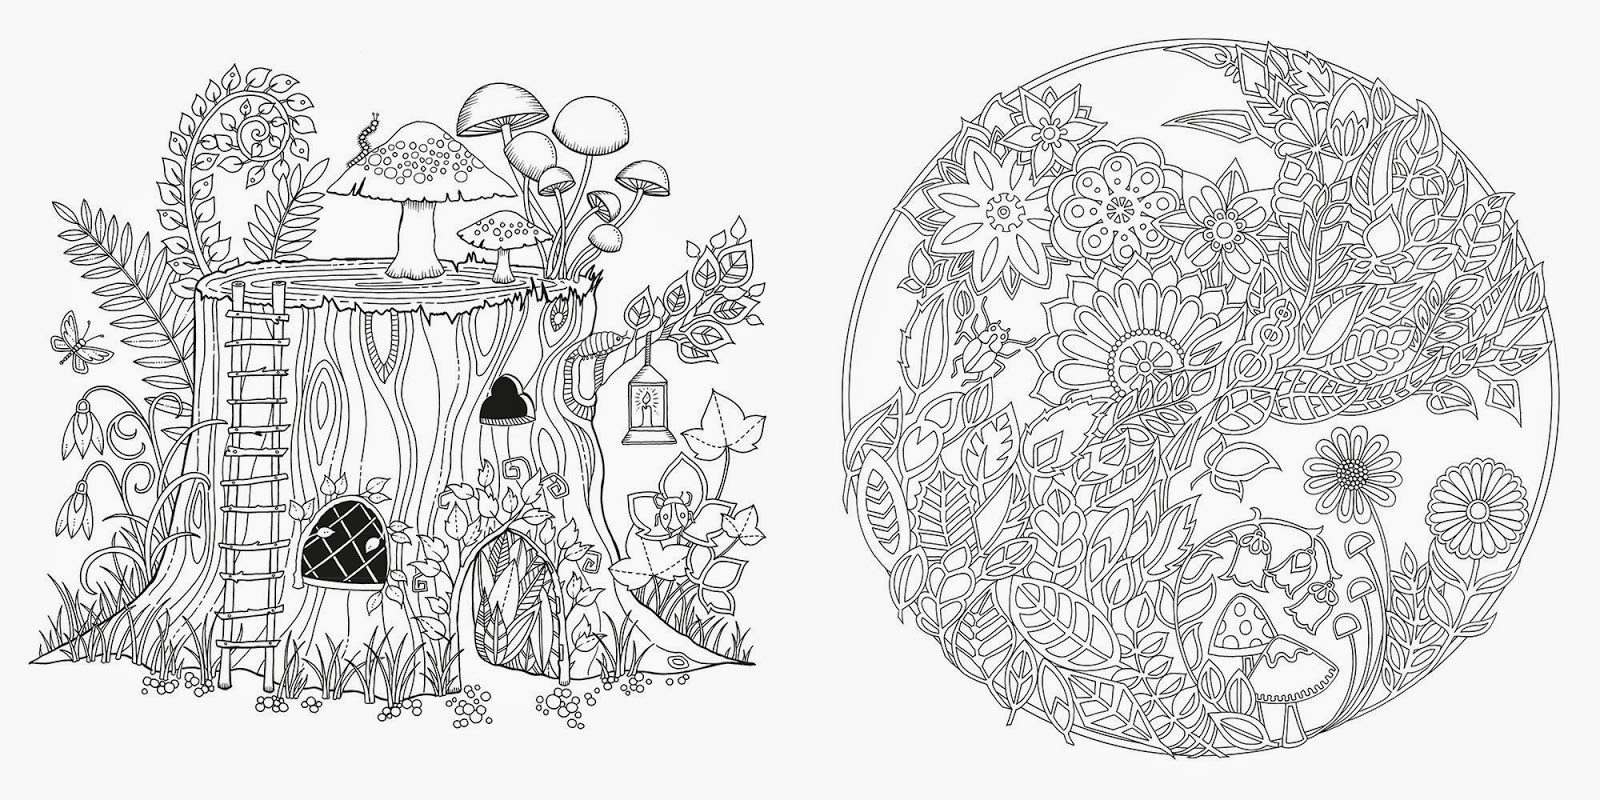 Enchanted Forest Adult Coloring Book
 enchanted forest coloring pages